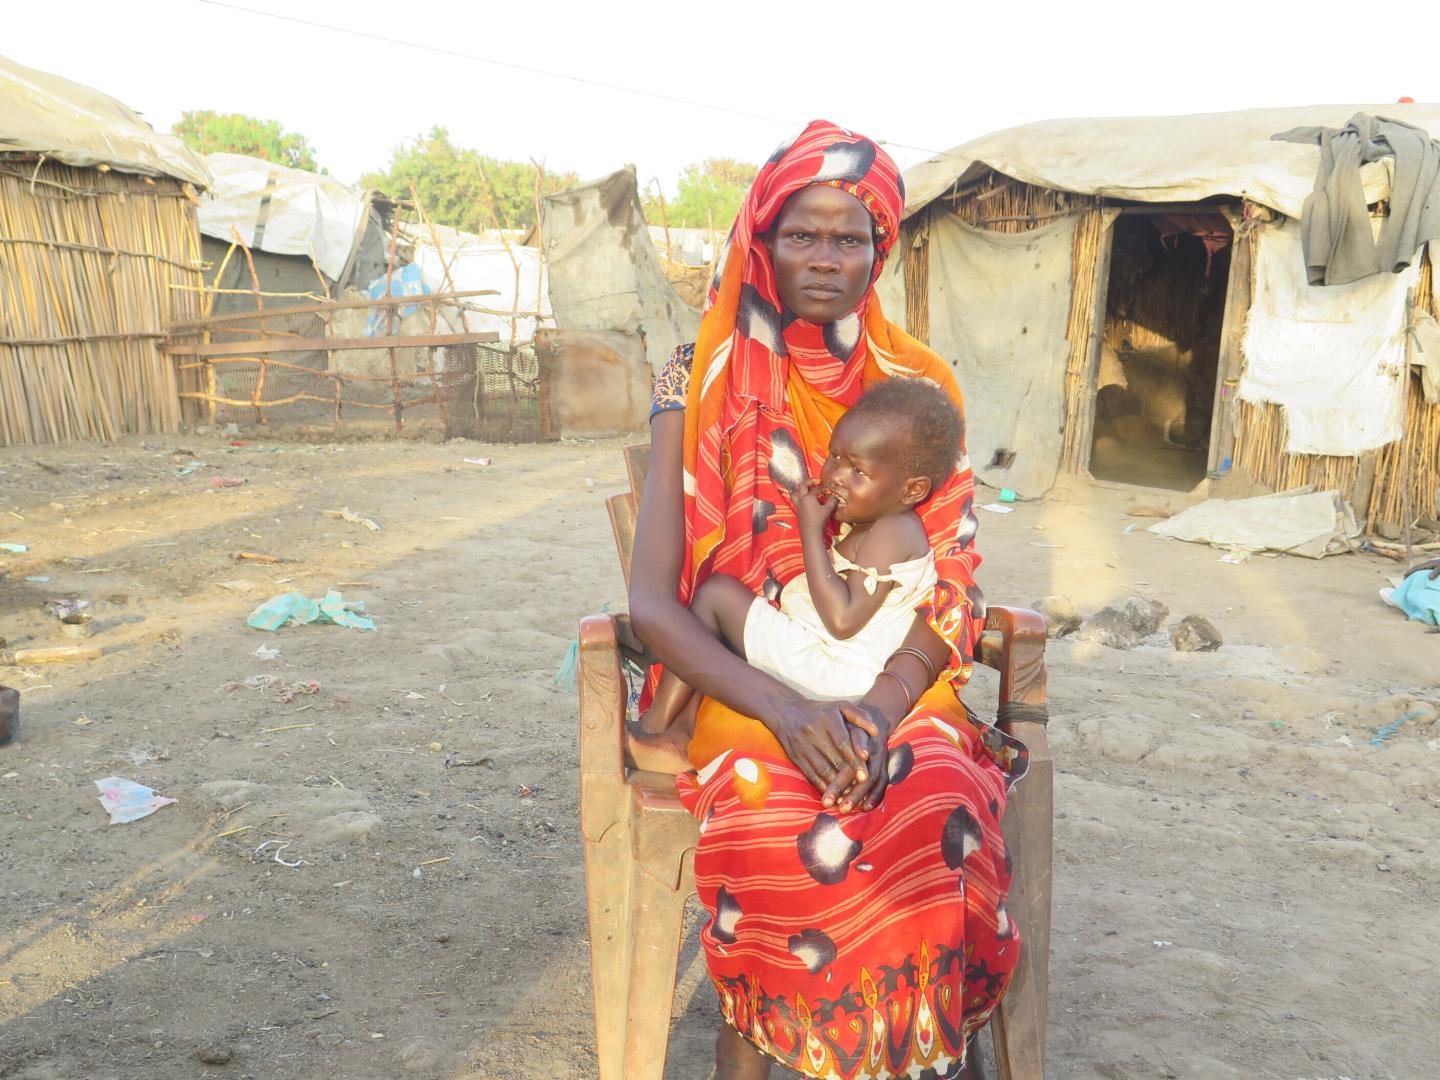 Nyarwot Bim Chan and one of her children, Gatkuoth, in front of their home in the Rubkona camp for internally displaced South Sudanese.